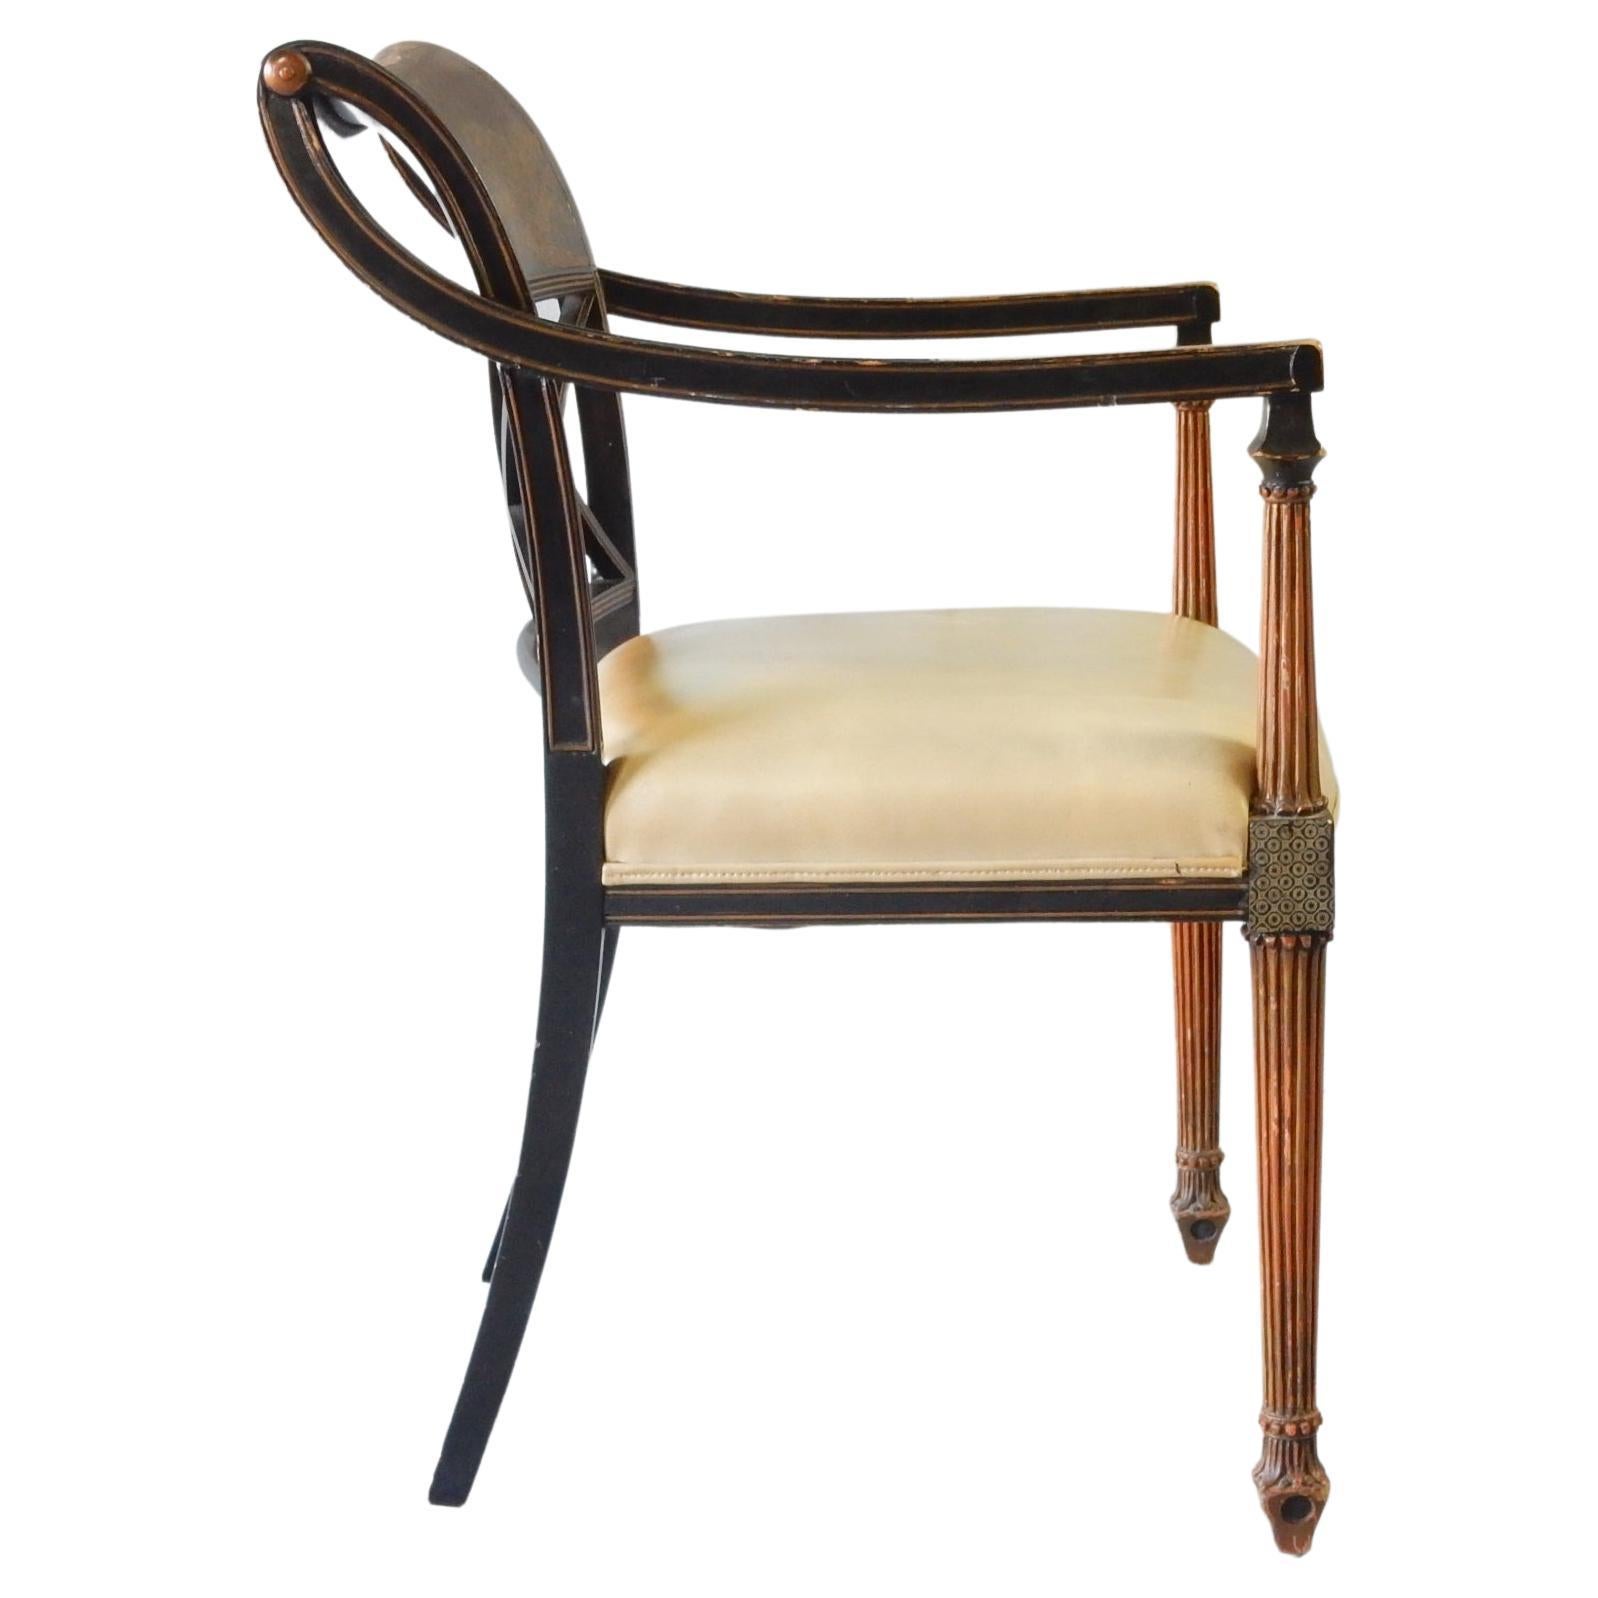 Rare chinoiserie/regency style arm chair by Interior-Crafts of Chicago.
Beautifully painted and crafted by Interior Crafts. Signed with medallion on underside of seat.
Completely original as was produced. Worn/aged to perfection.
Arms are 28in